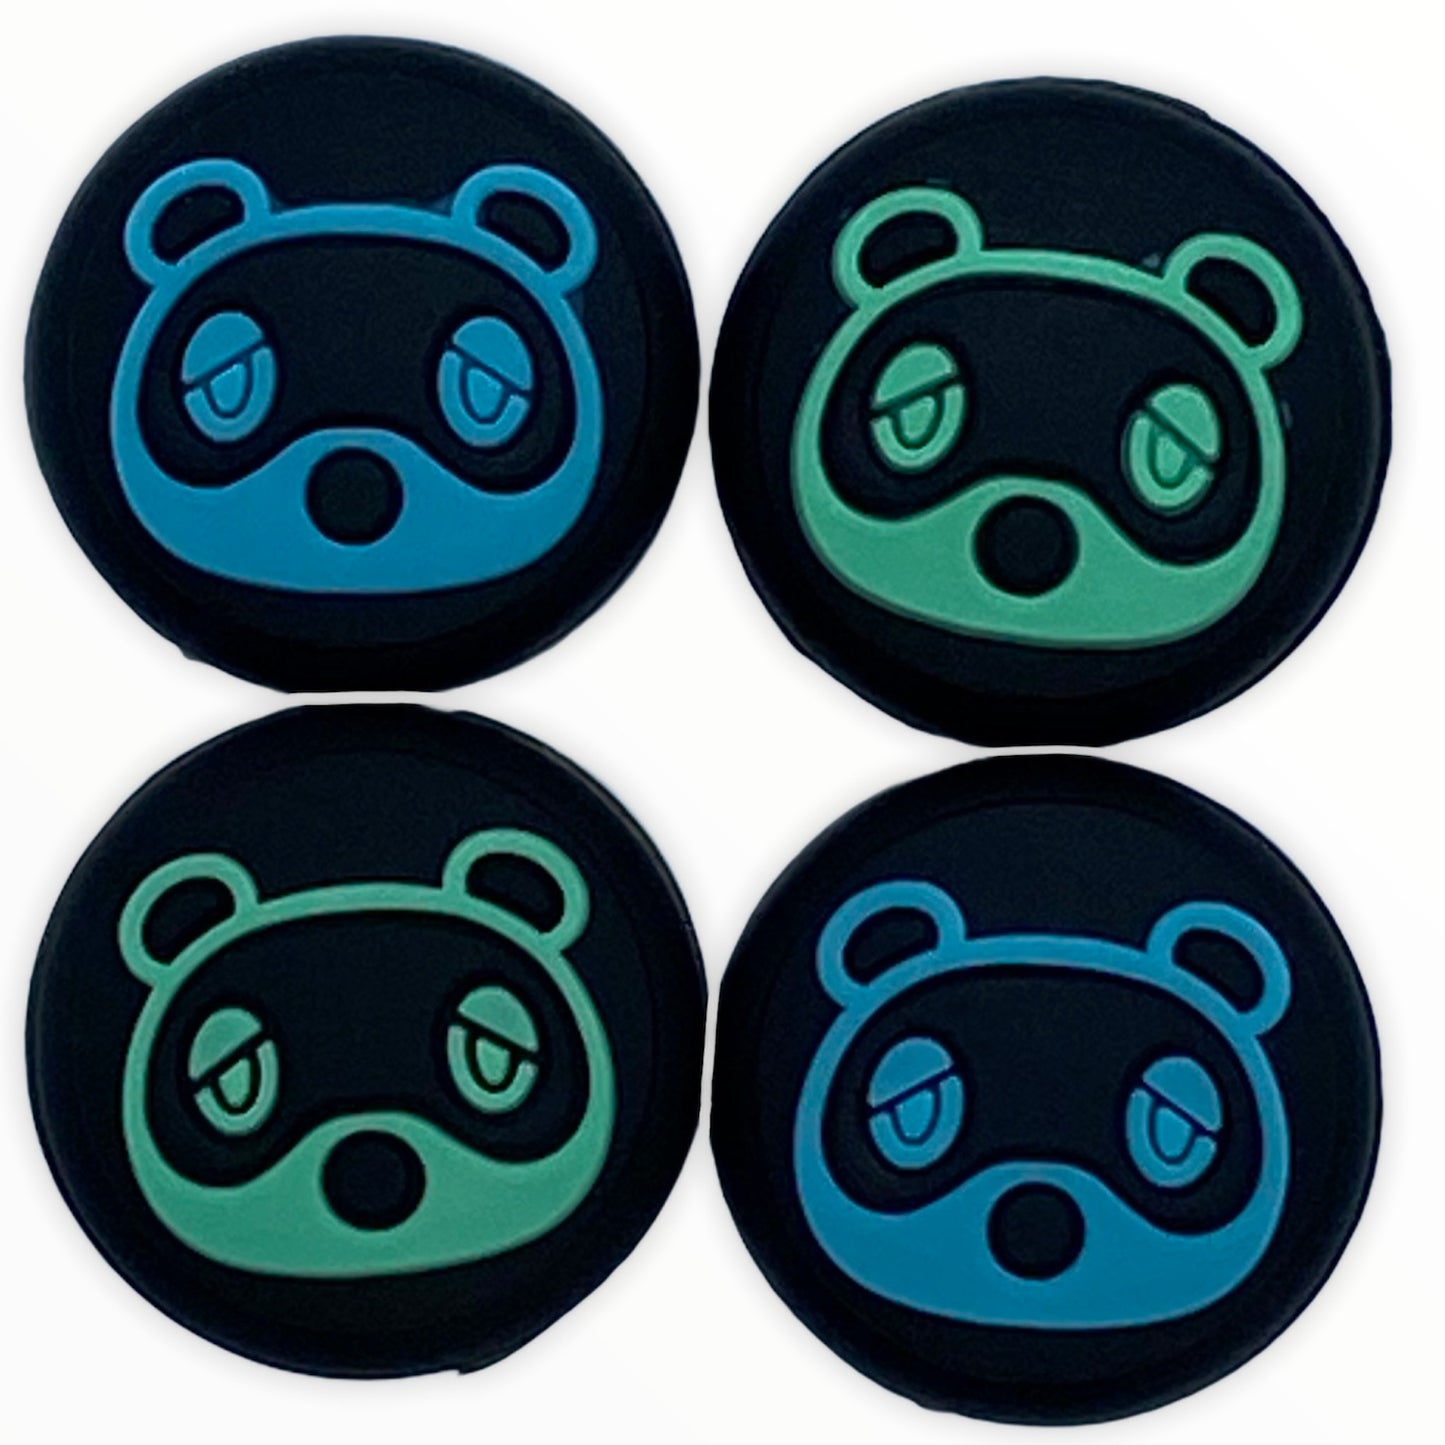 JenDore Blue Green & Black 4Pcs Raccoon Silicone Thumb Grip Caps for Nintendo Switch